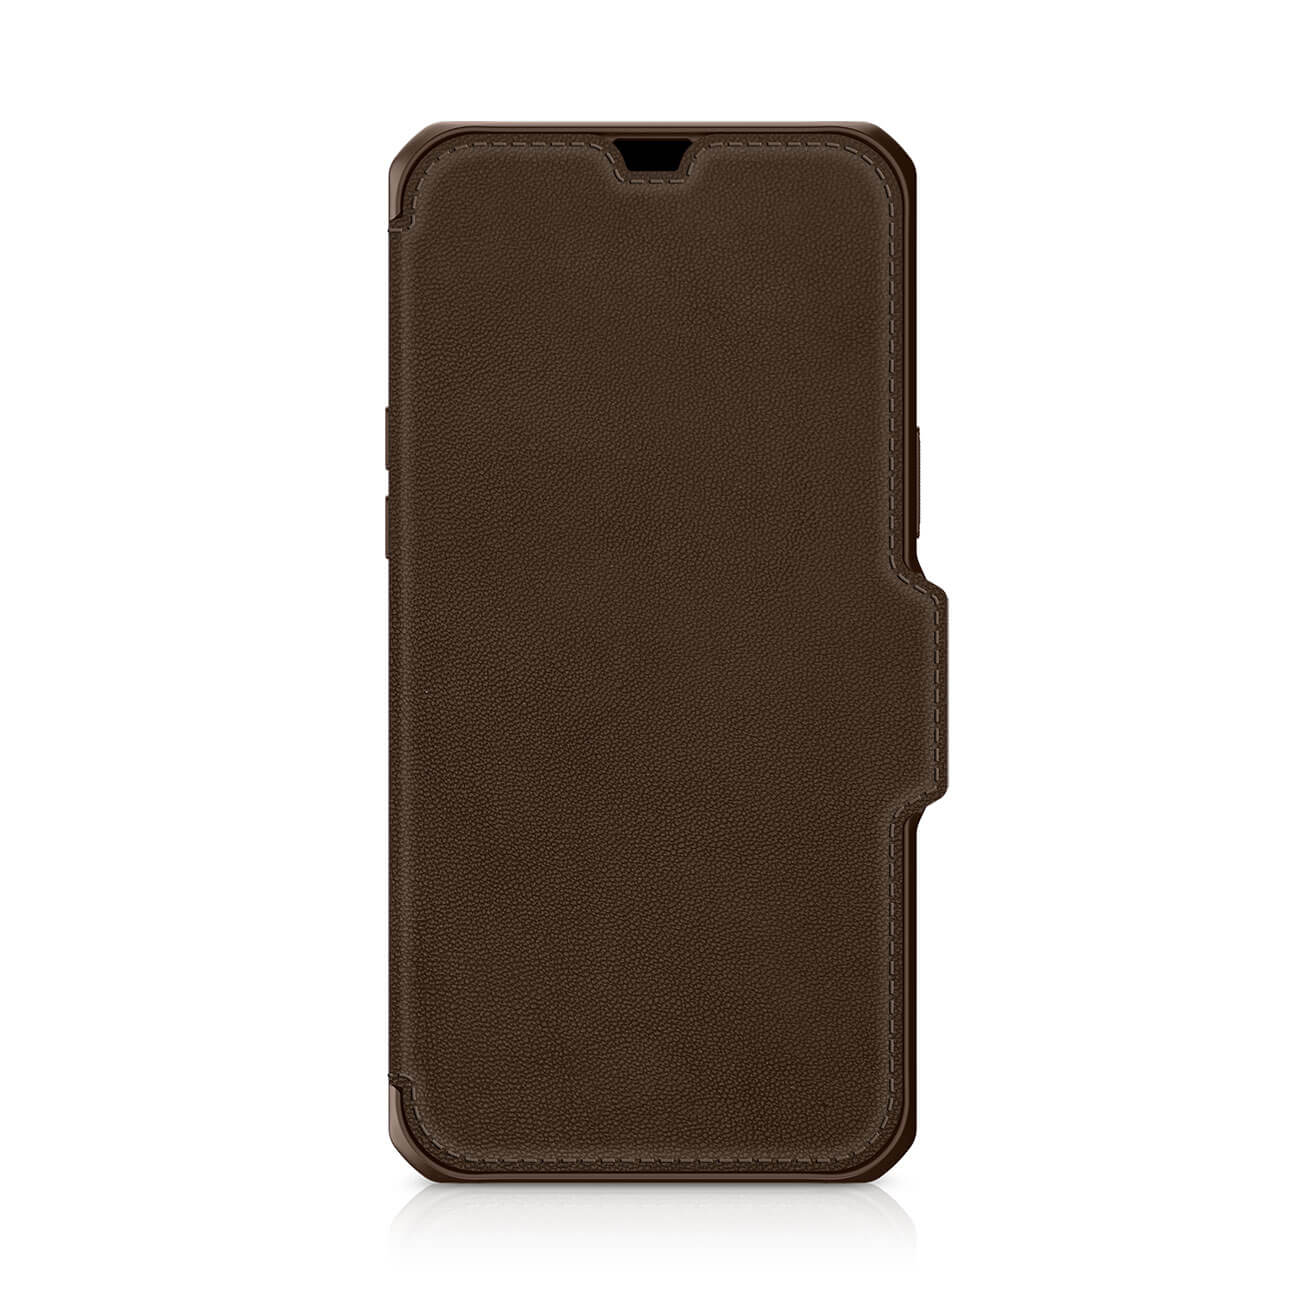 ITSKINS - Hybrid Folio Leather for iPhone 13 Pro Max/12 Pro Max [ Brown with real leather ]